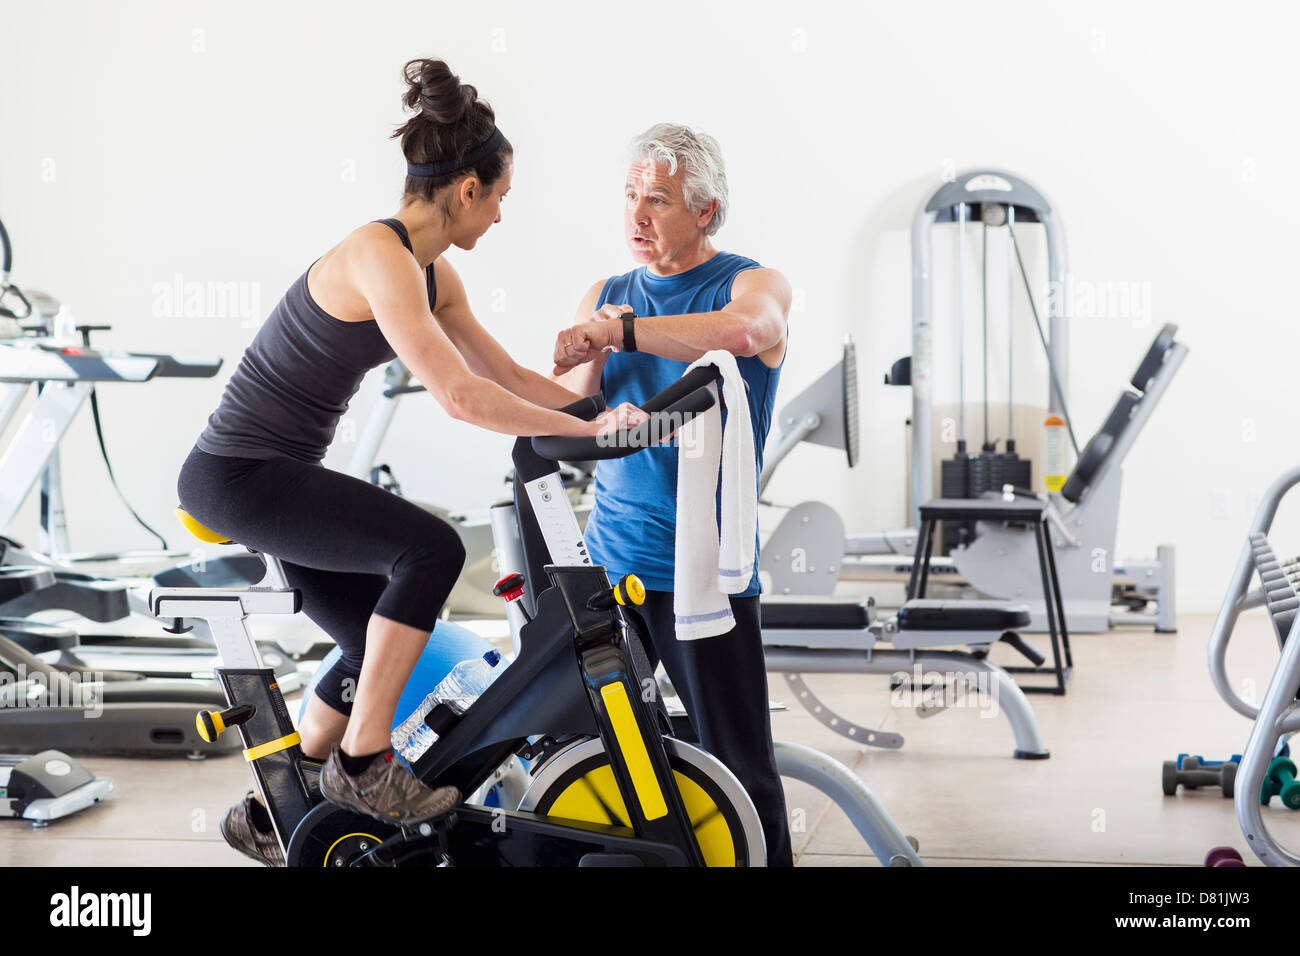 Hispanic trainer working with woman in gym Stock Photo